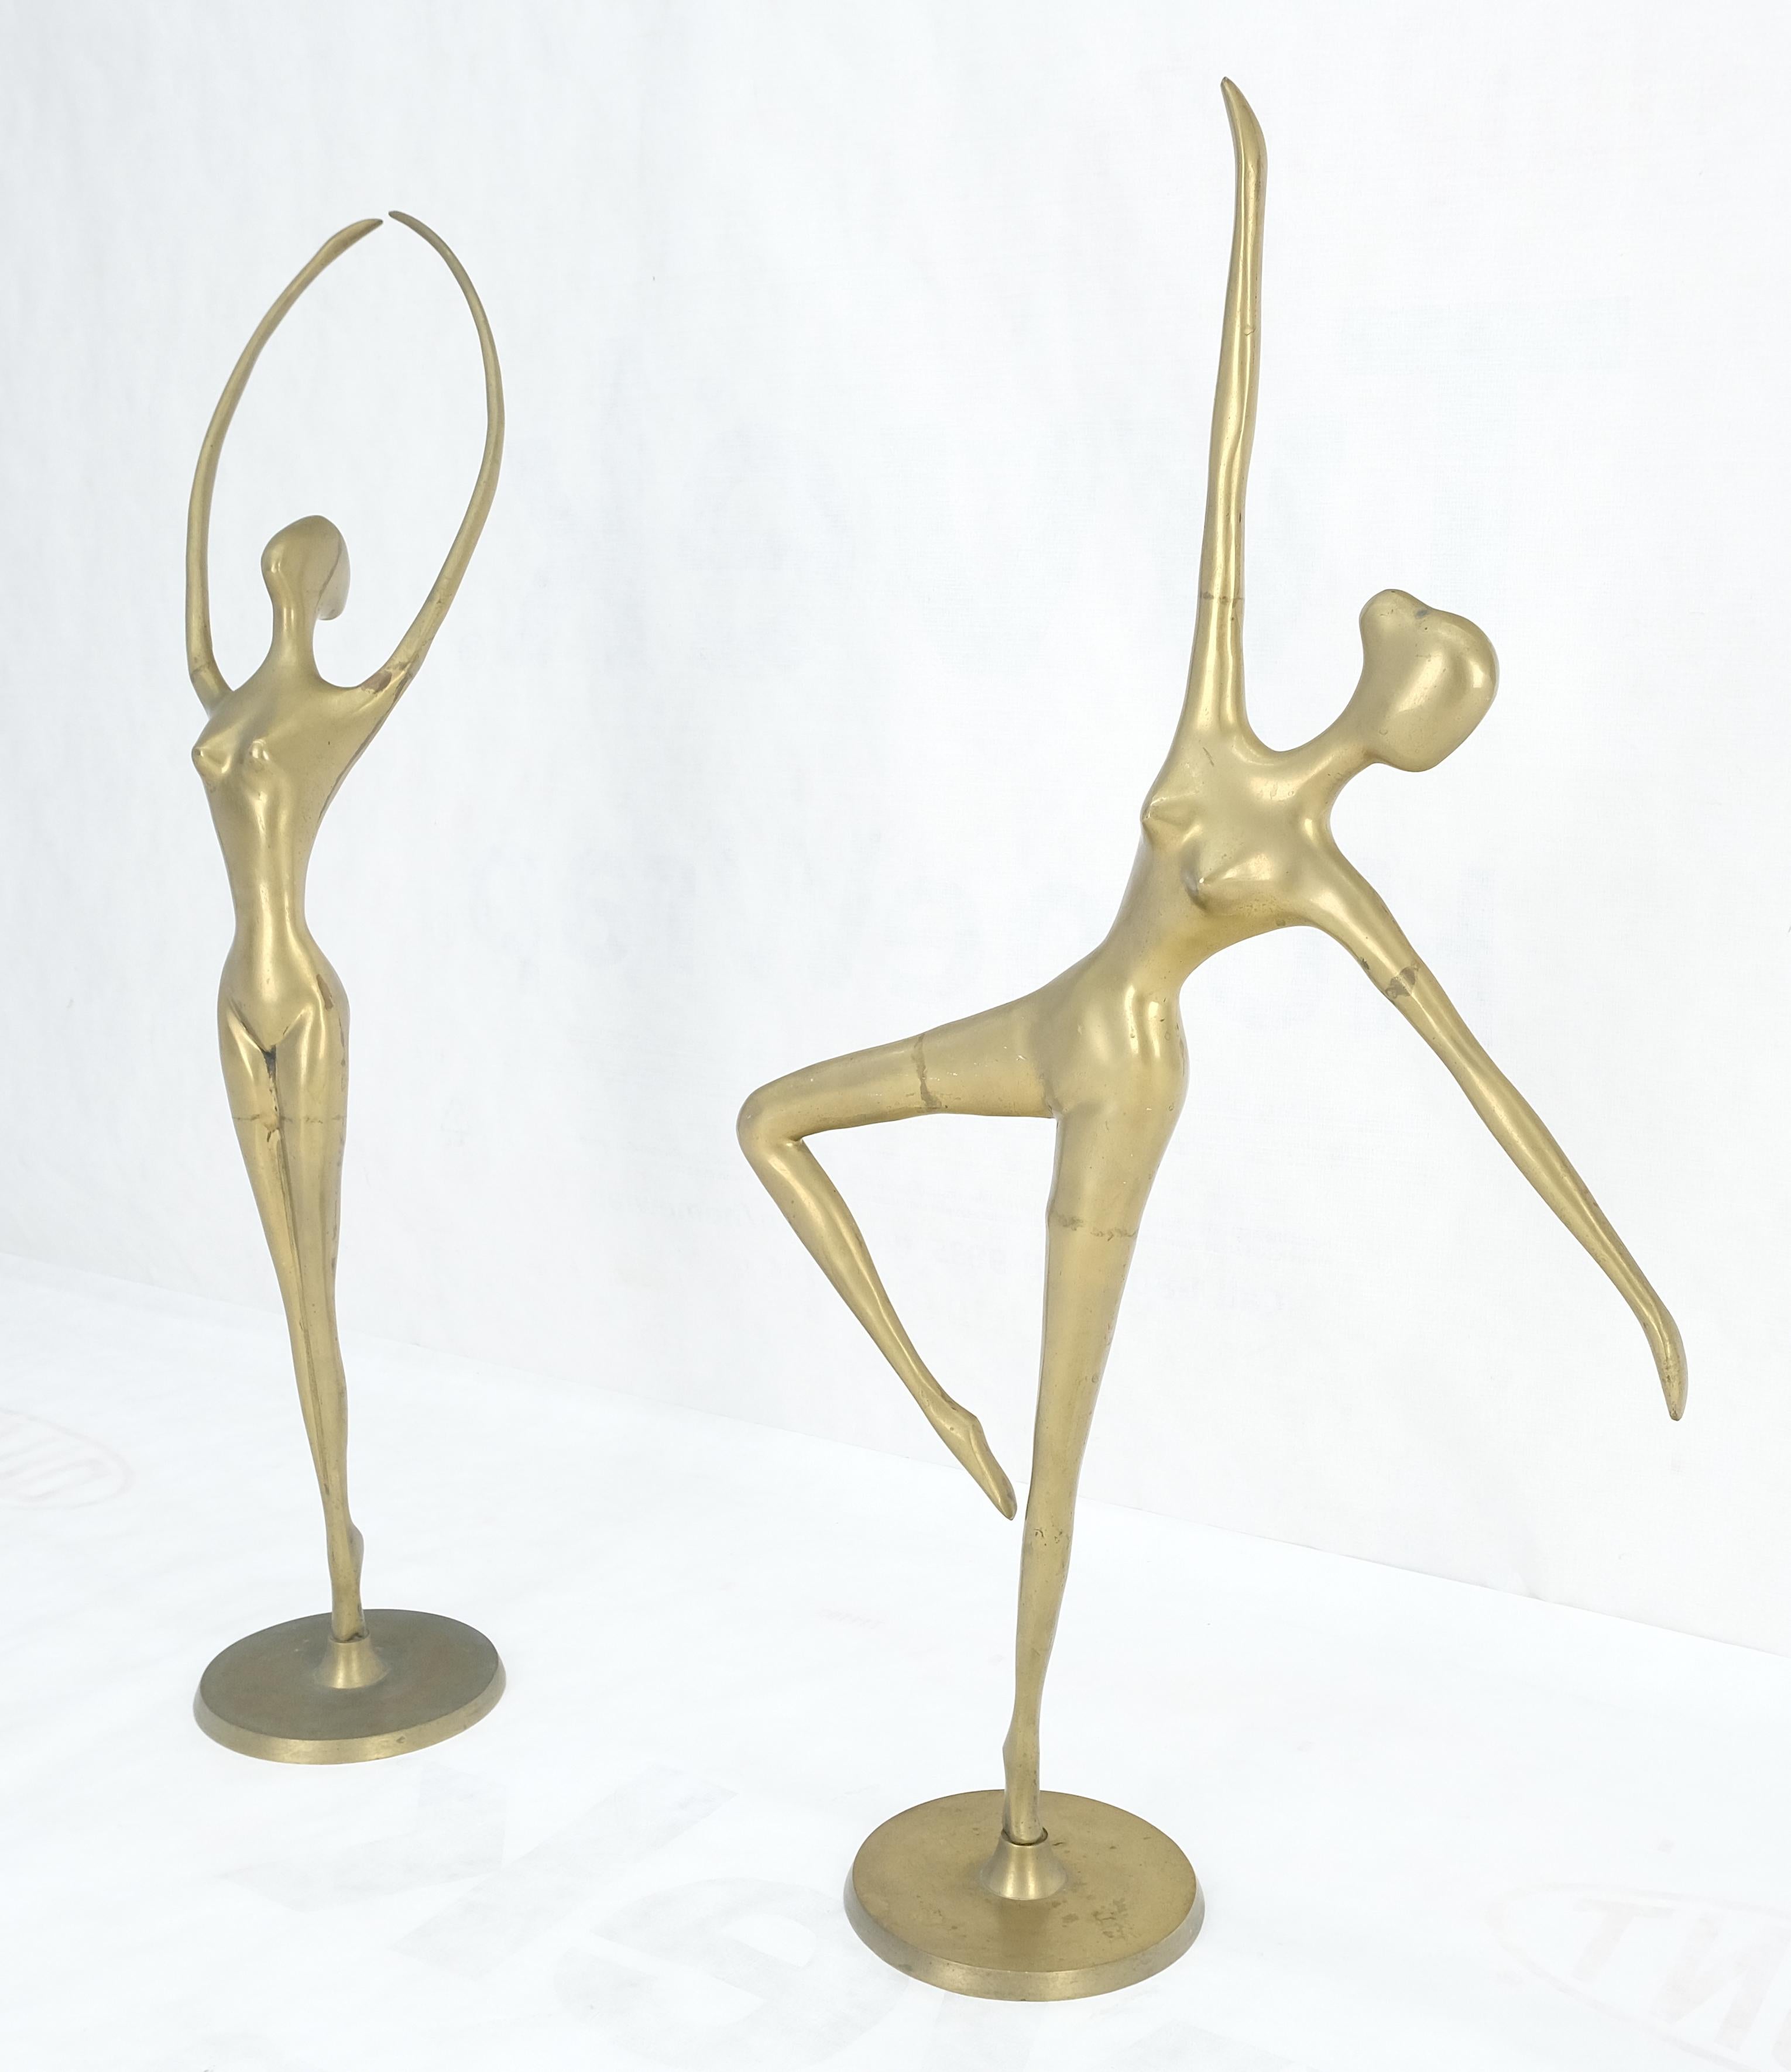 Unknown Pair of 3 Foot Tall Solid Brass Ballerina Dancers Sculptures Figurines Statue  For Sale